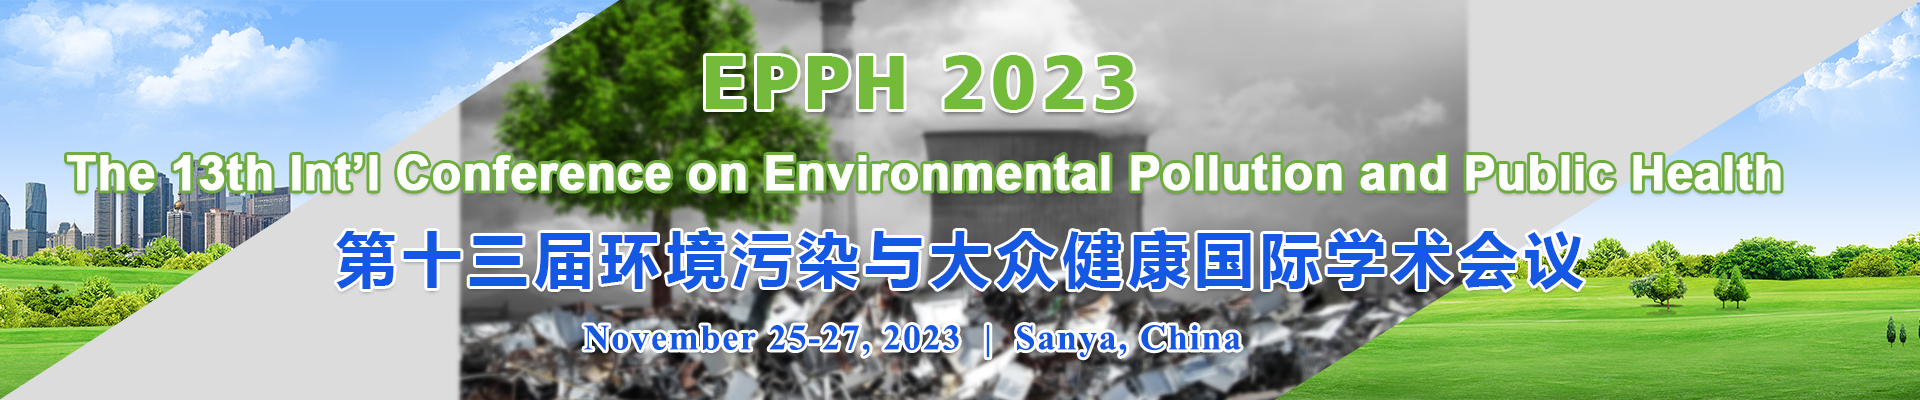 The 13th Int’l Conference on Environmental Pollution and Public Health (EPPH 2023), Online Event